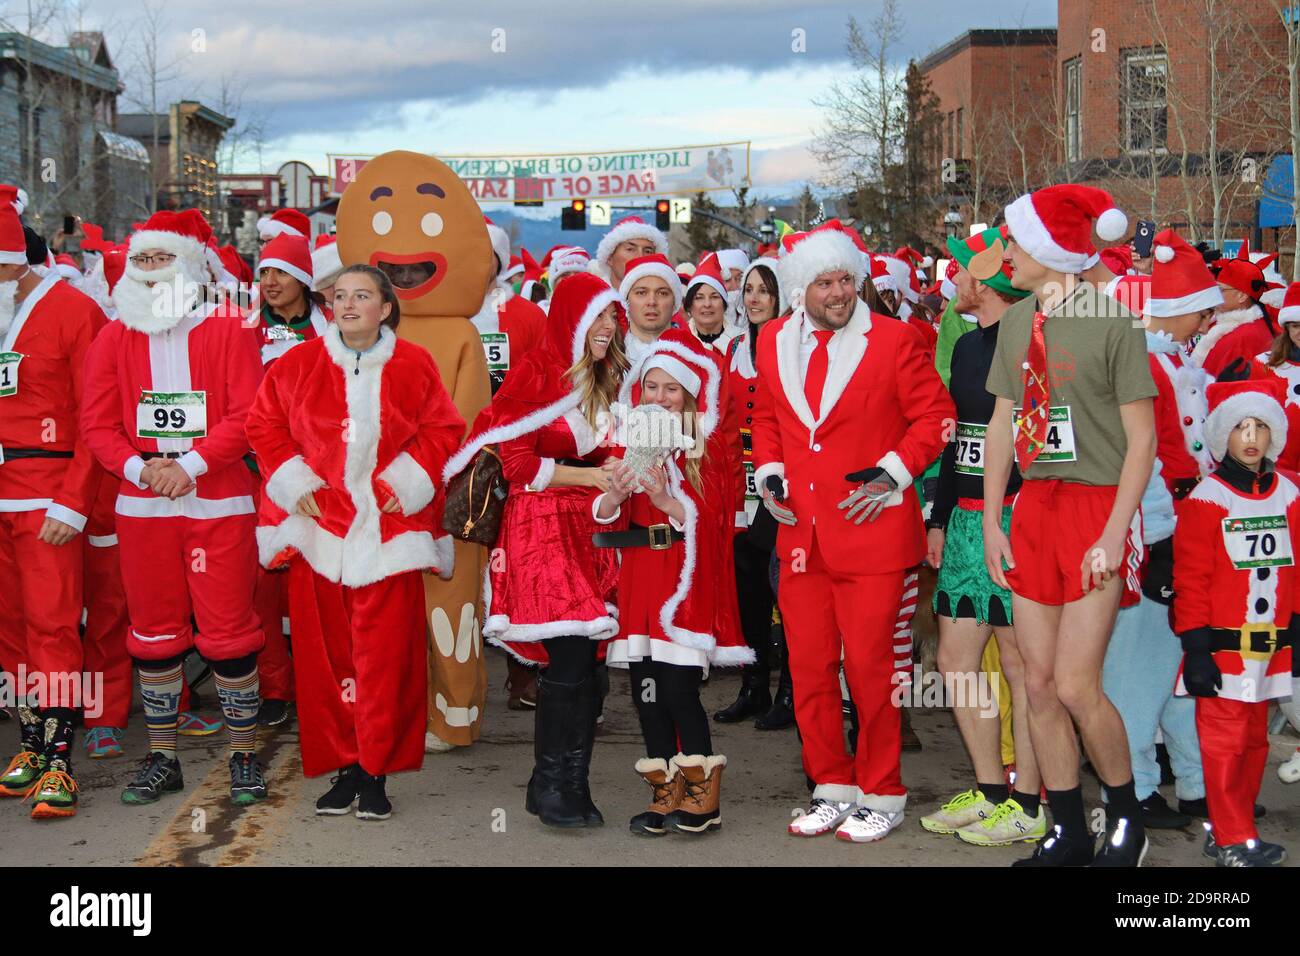 People dressed in santa suits and one gingerbread man in annual race for charity Stock Photo